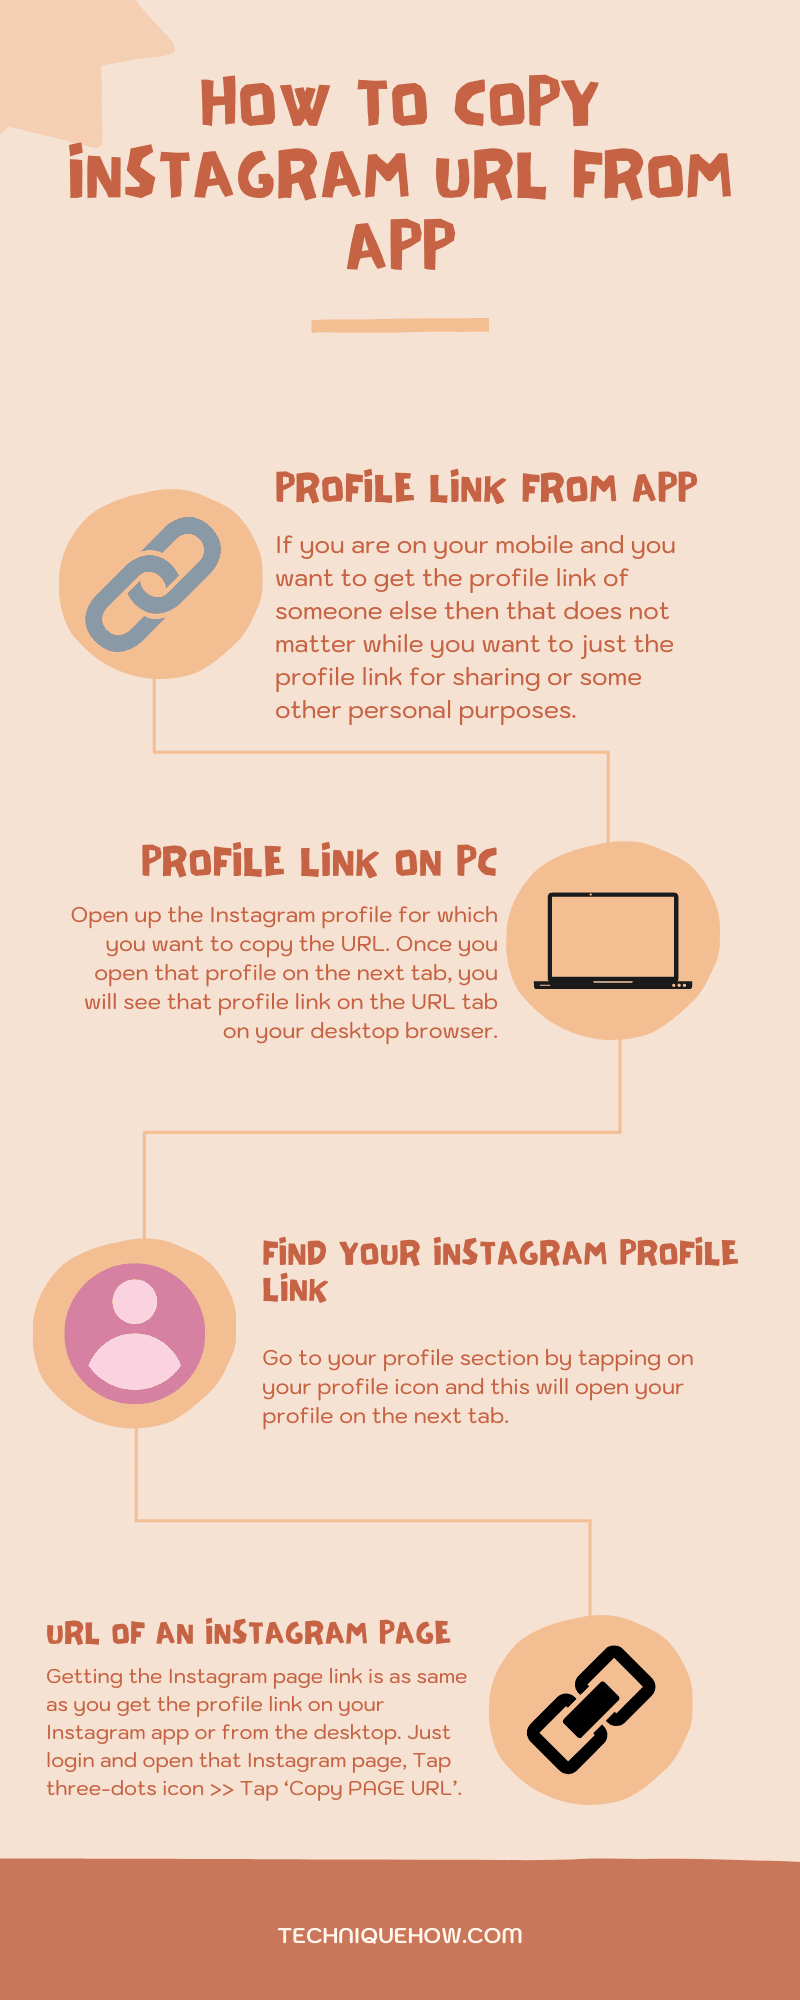 Infographic_How to Copy Instagram URL from App